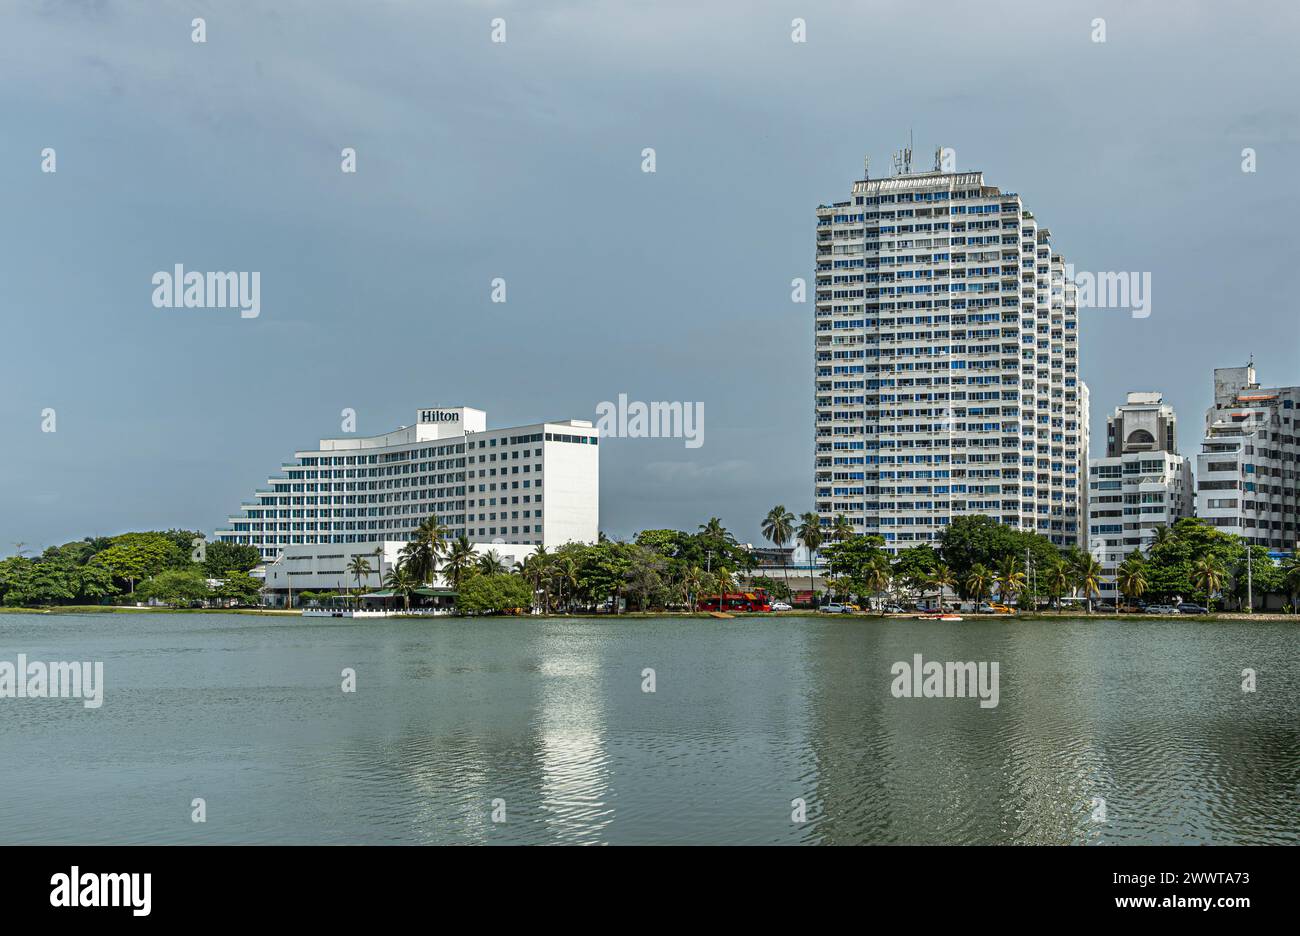 Cartagena, Colombia - July 25, 2023: Central Bocagrande. Hilton hotel on south side of El Laguito laguna with greenish water and other tall apartment Stock Photo